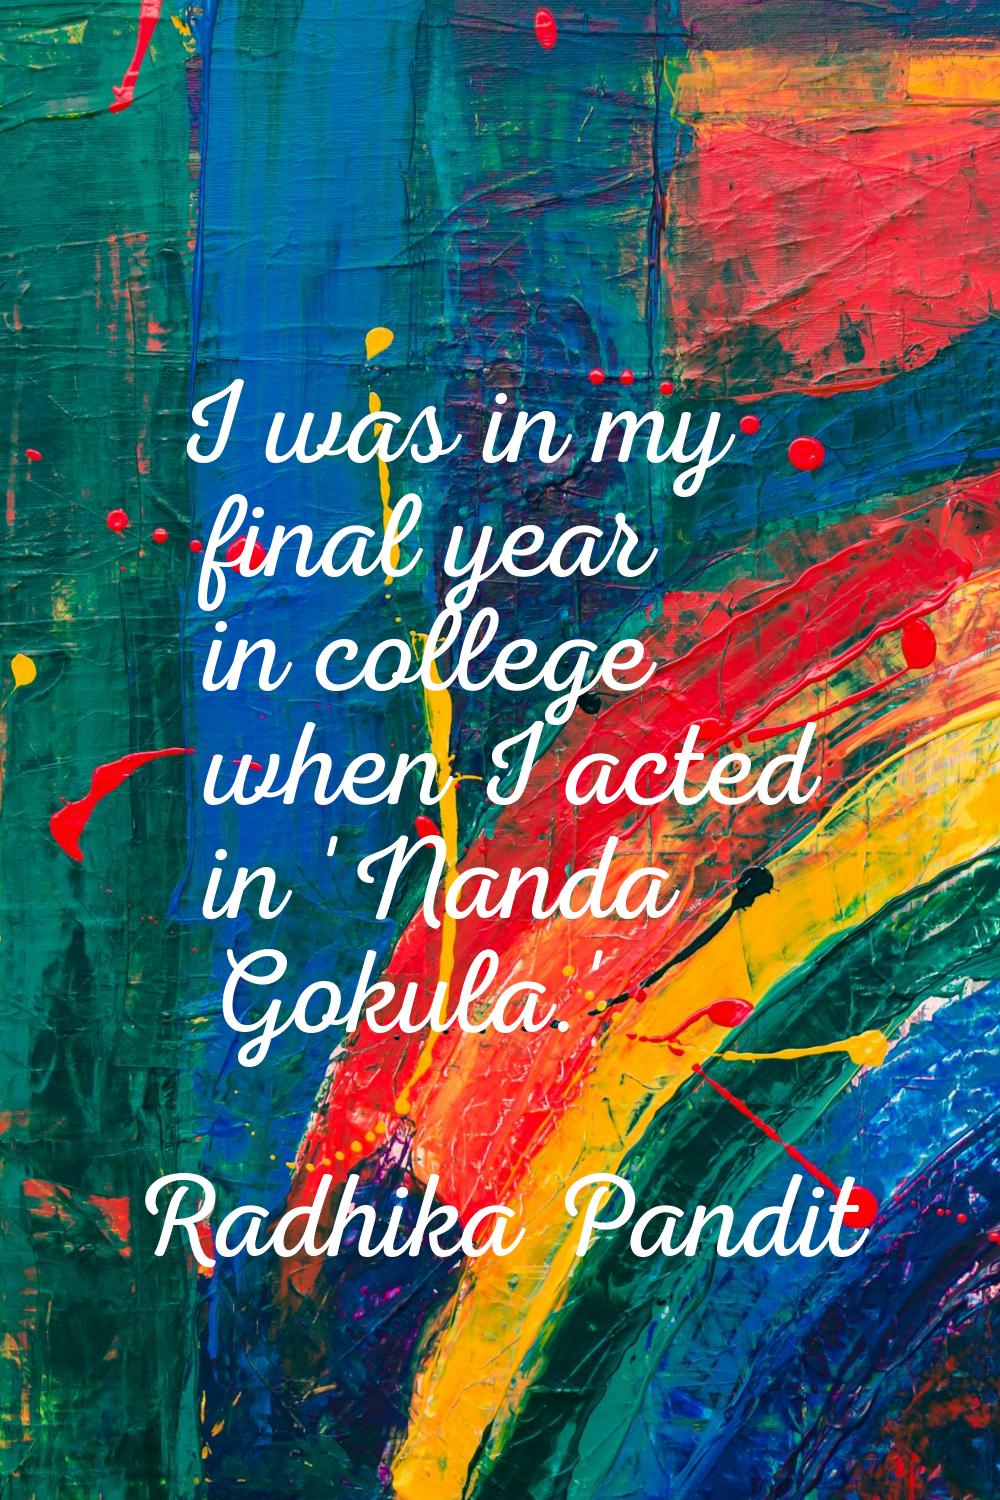 I was in my final year in college when I acted in 'Nanda Gokula.'